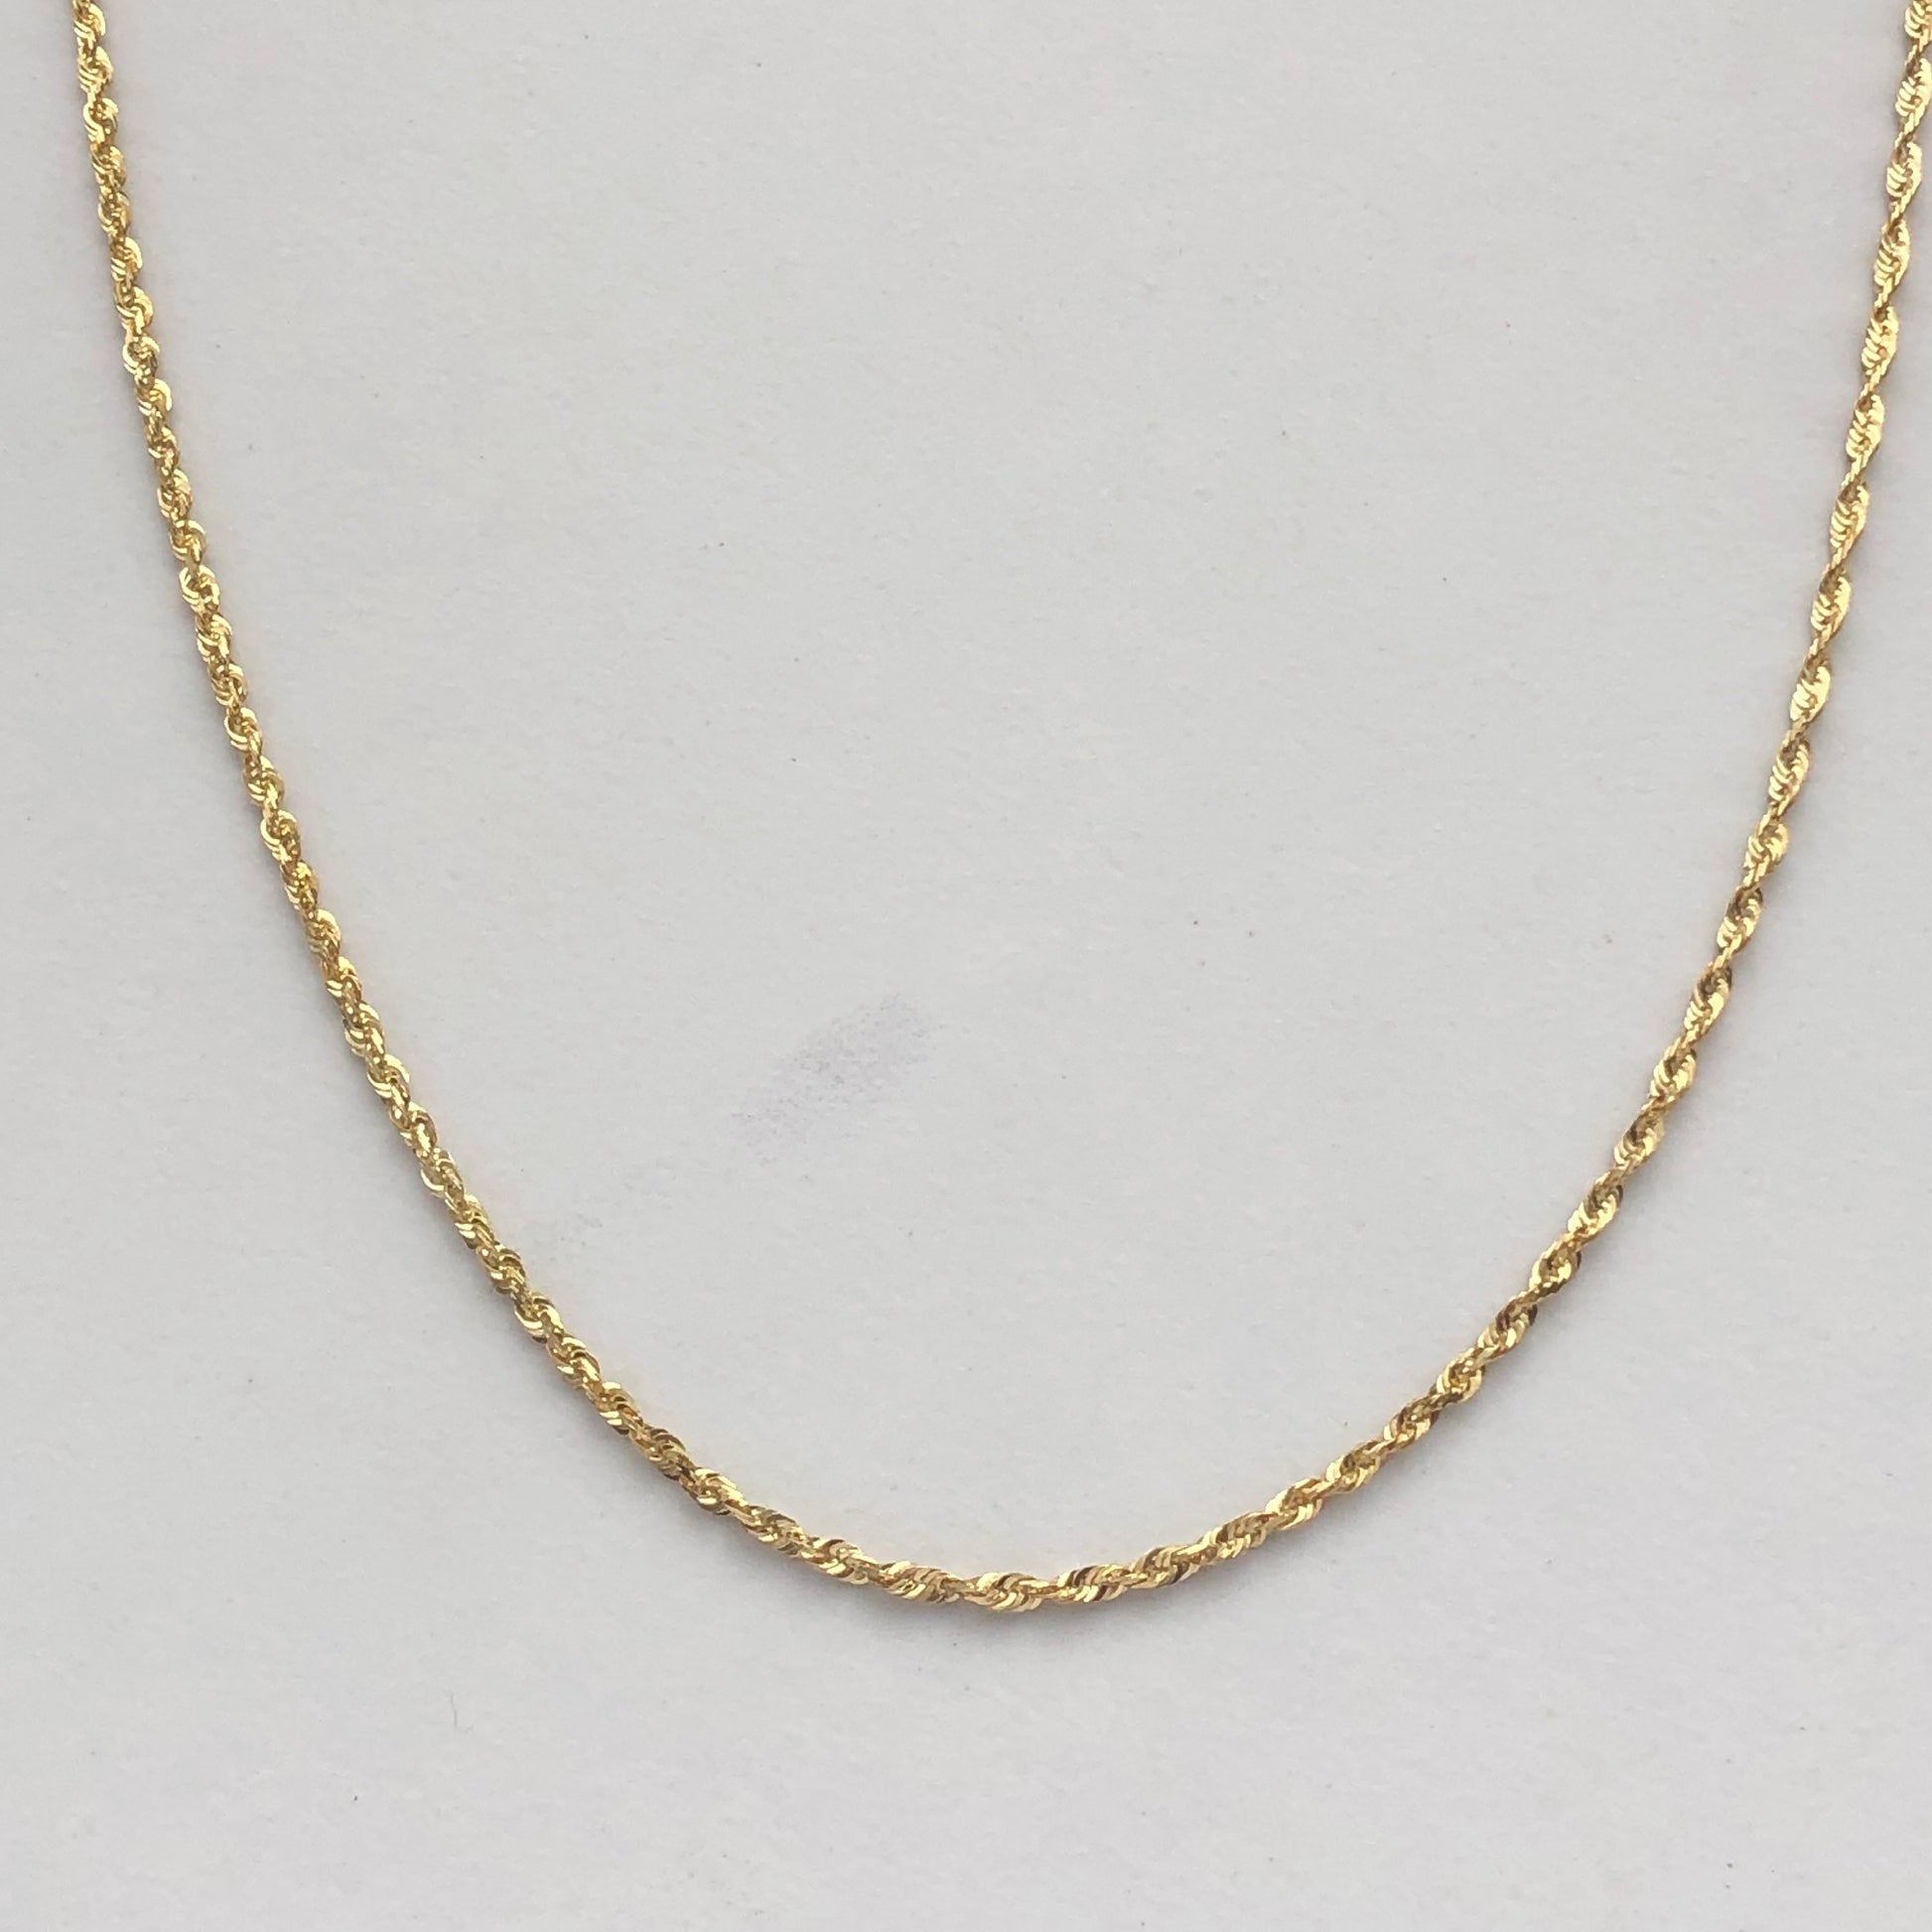 10KT Yellow Gold Diamond-Cut Rope Chain Necklace 30"/ 2mm, 10KT Yellow Gold Diamond-Cut Rope Chain Necklace 30"/ 2mm - Legacy Saint Jewelry